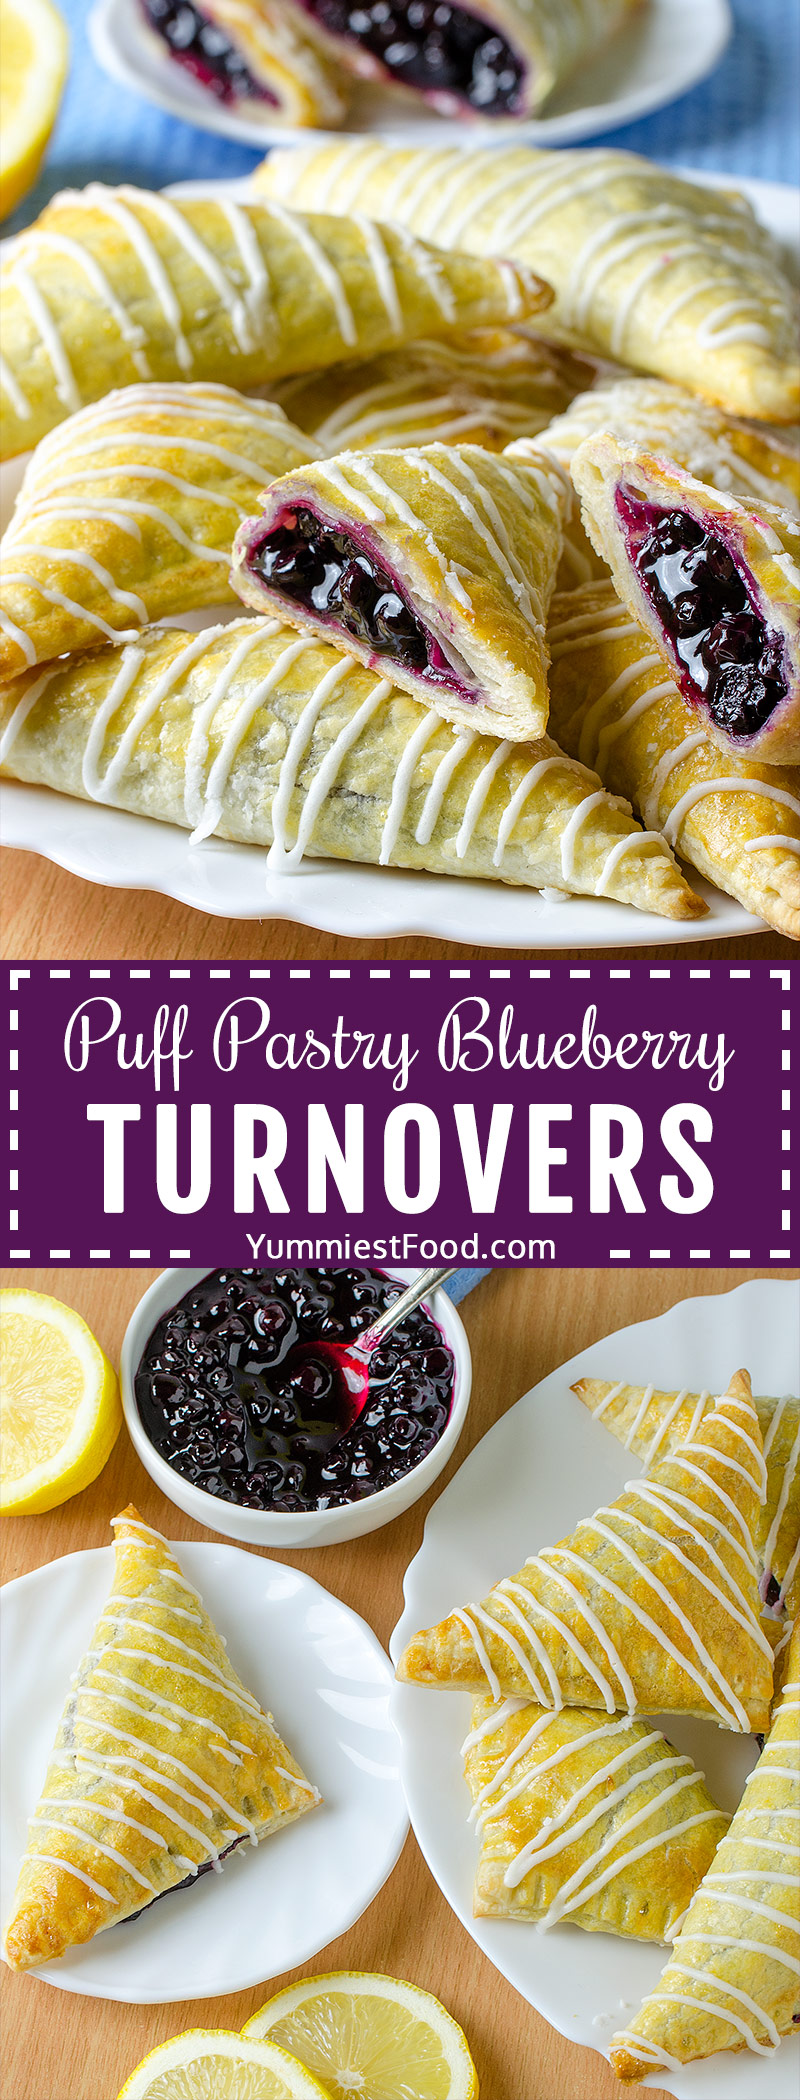 These Puff Pastry Blueberry Turnovers are light, flaky, filled with blueberry filling then drizzled with lemon glaze